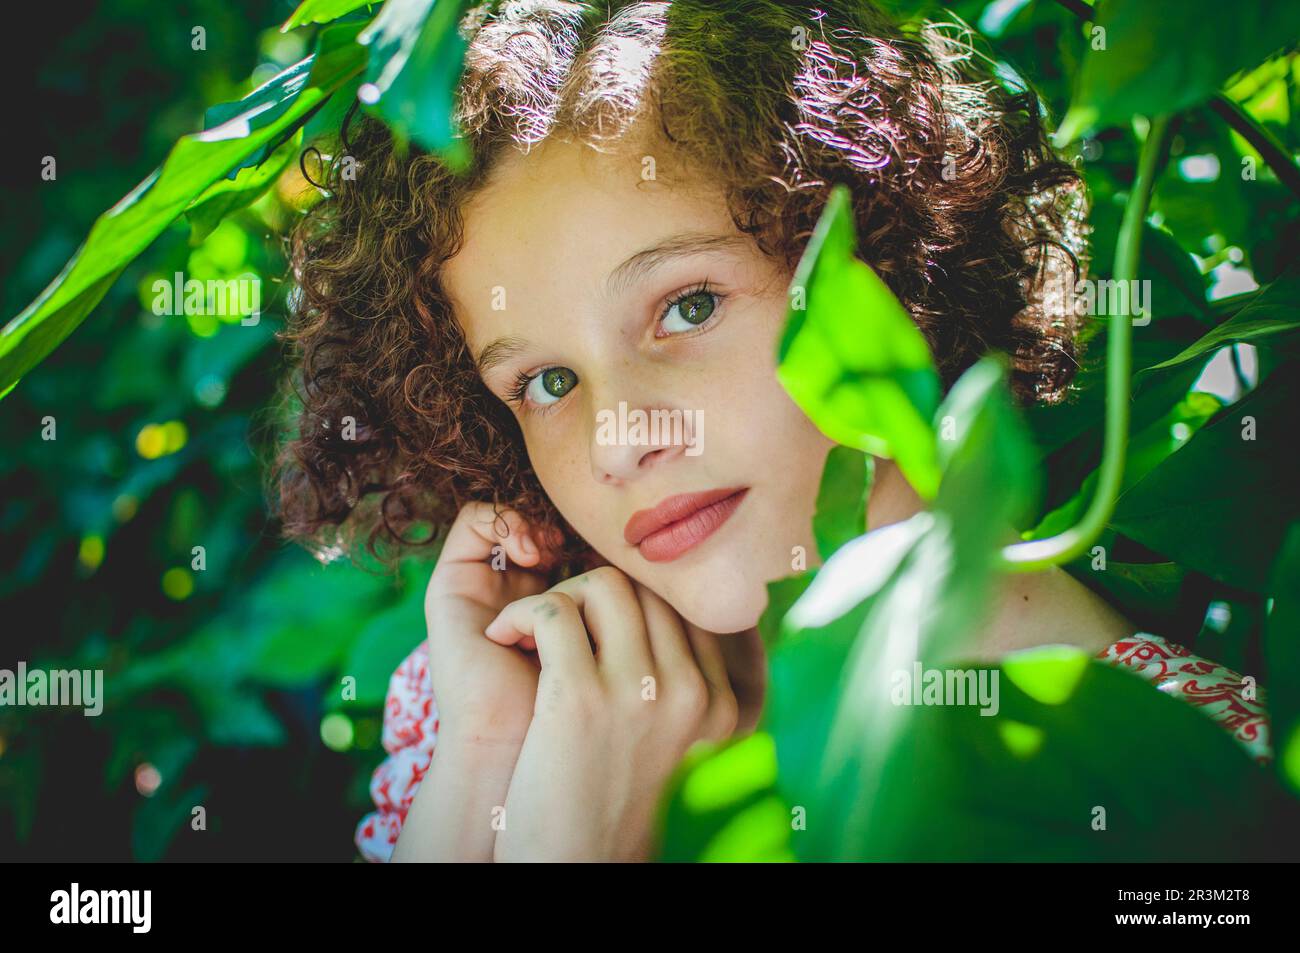 Portrait of curly girl Stock Photo